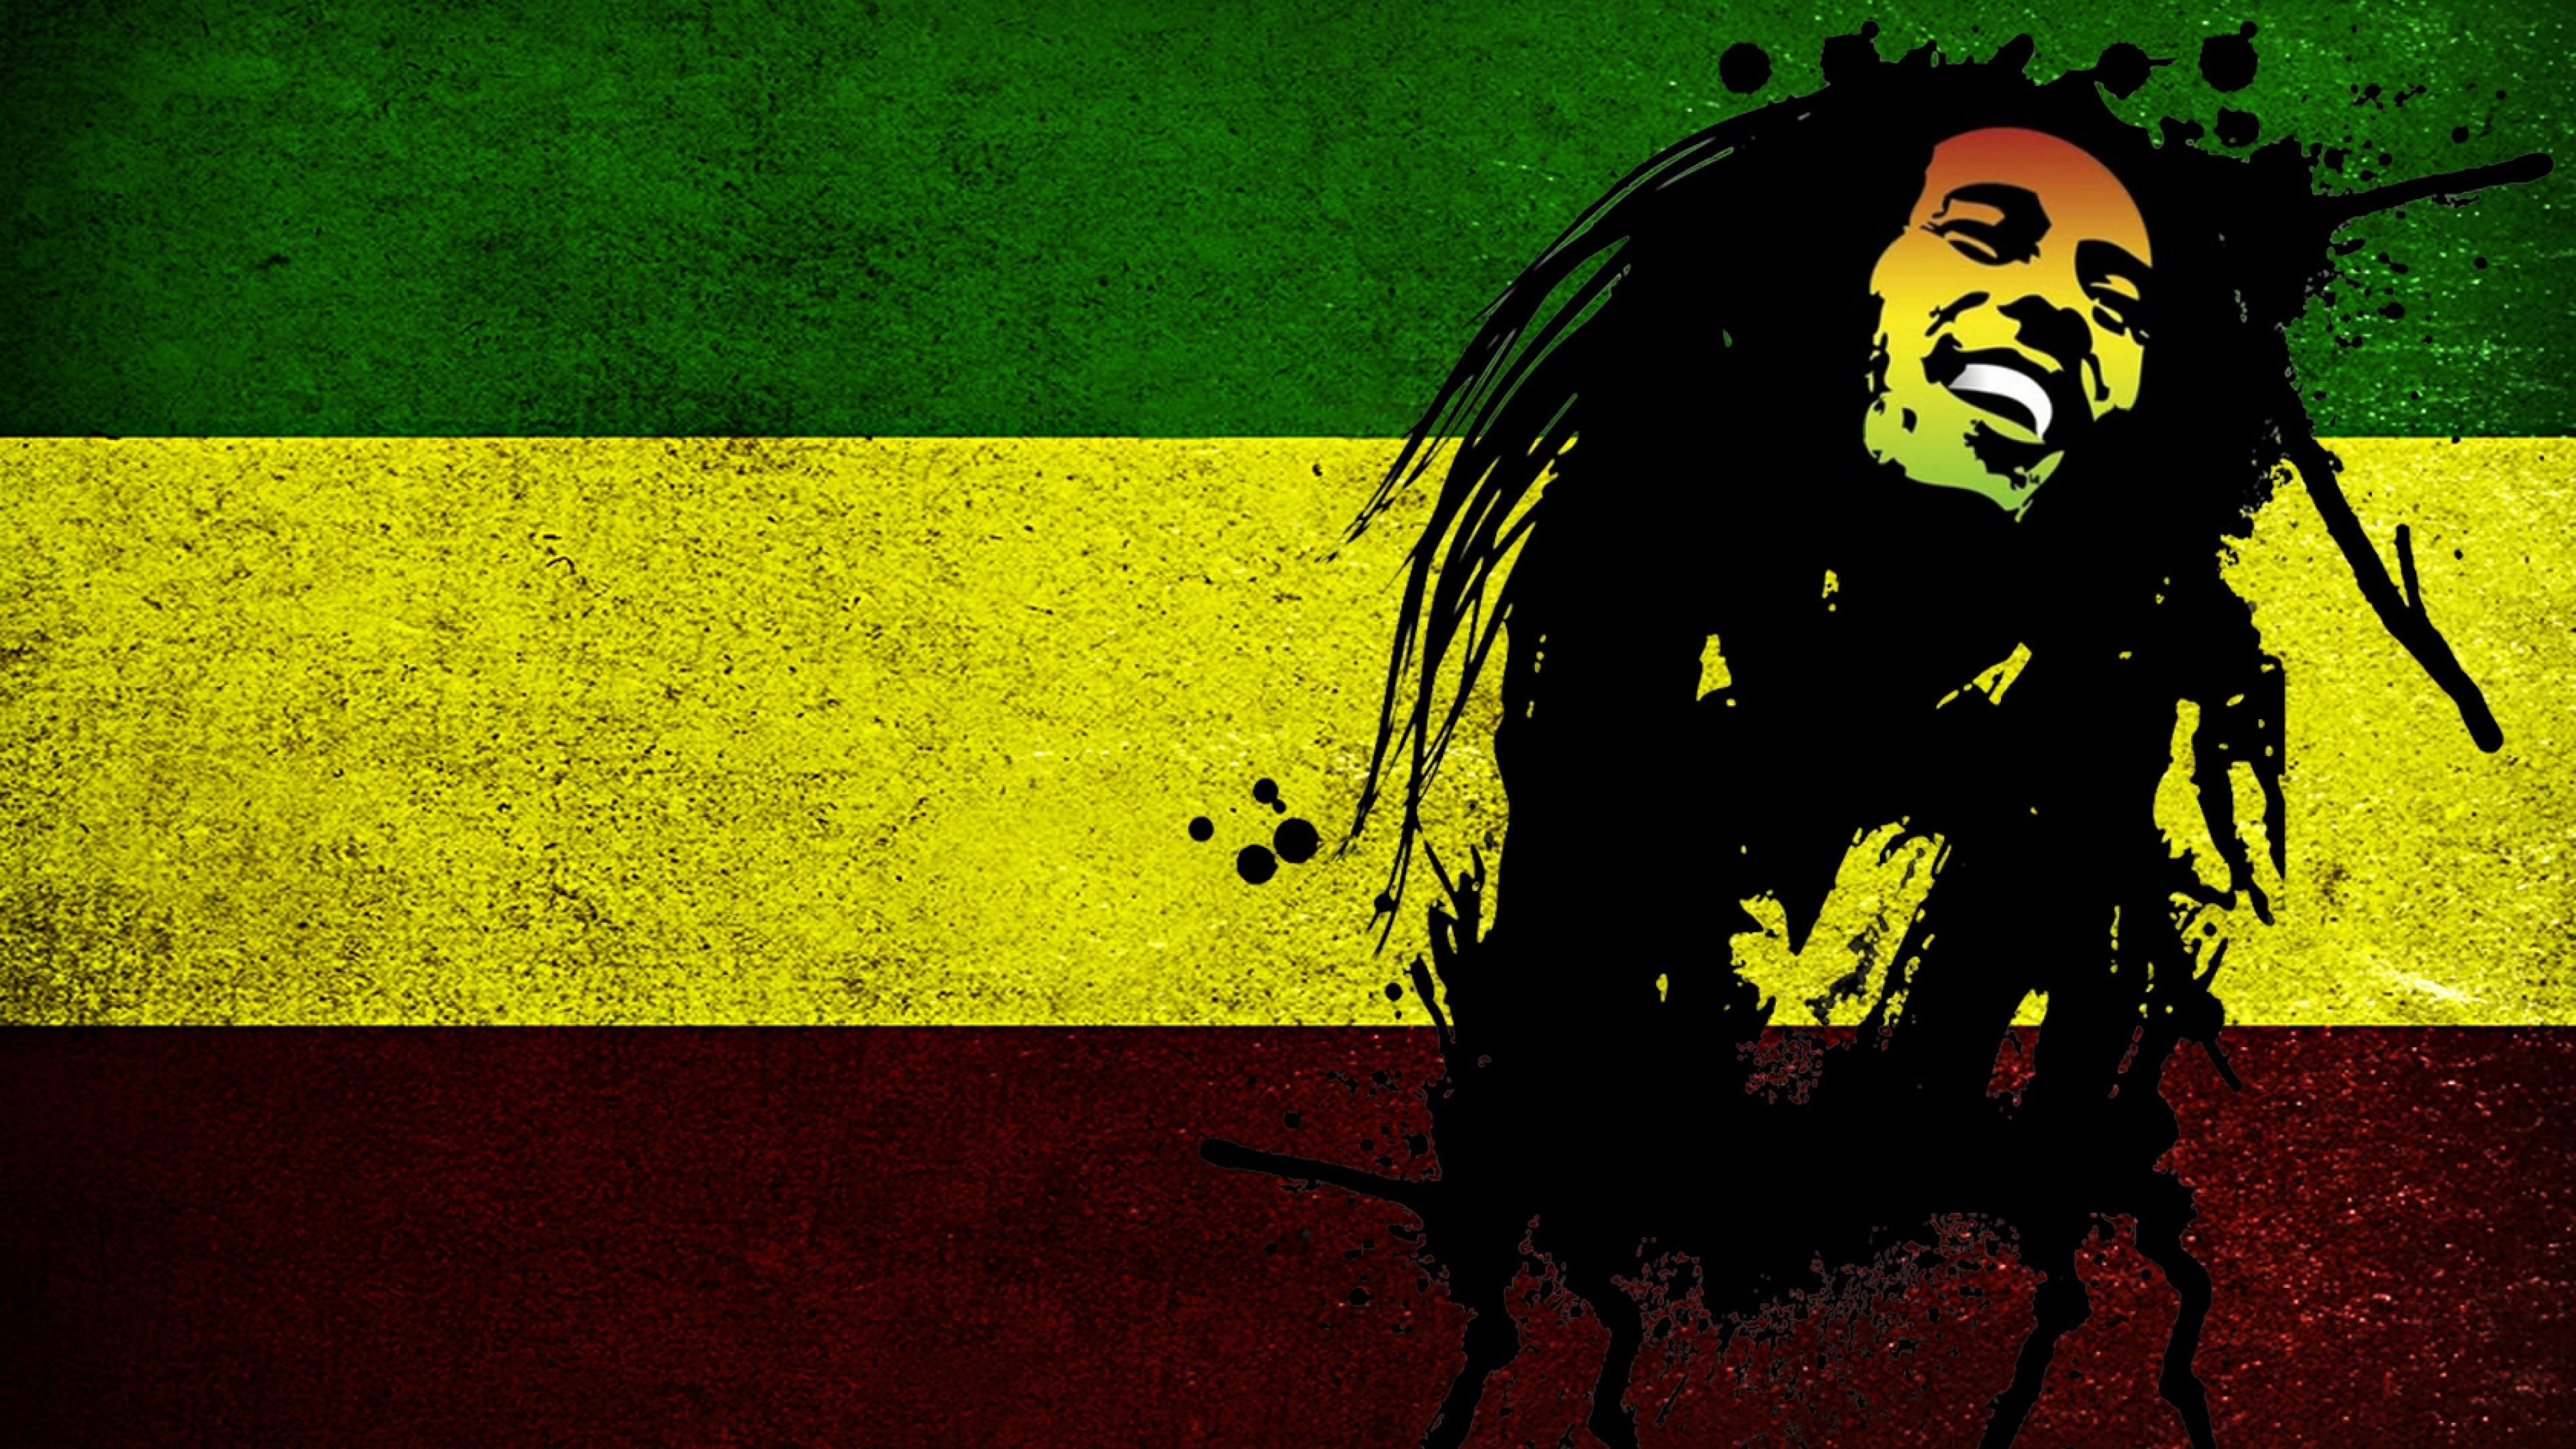 Bob Marley: Known as a Rastafari icon, infused his music with a sense of spirituality. 3840x2160 4K Background.